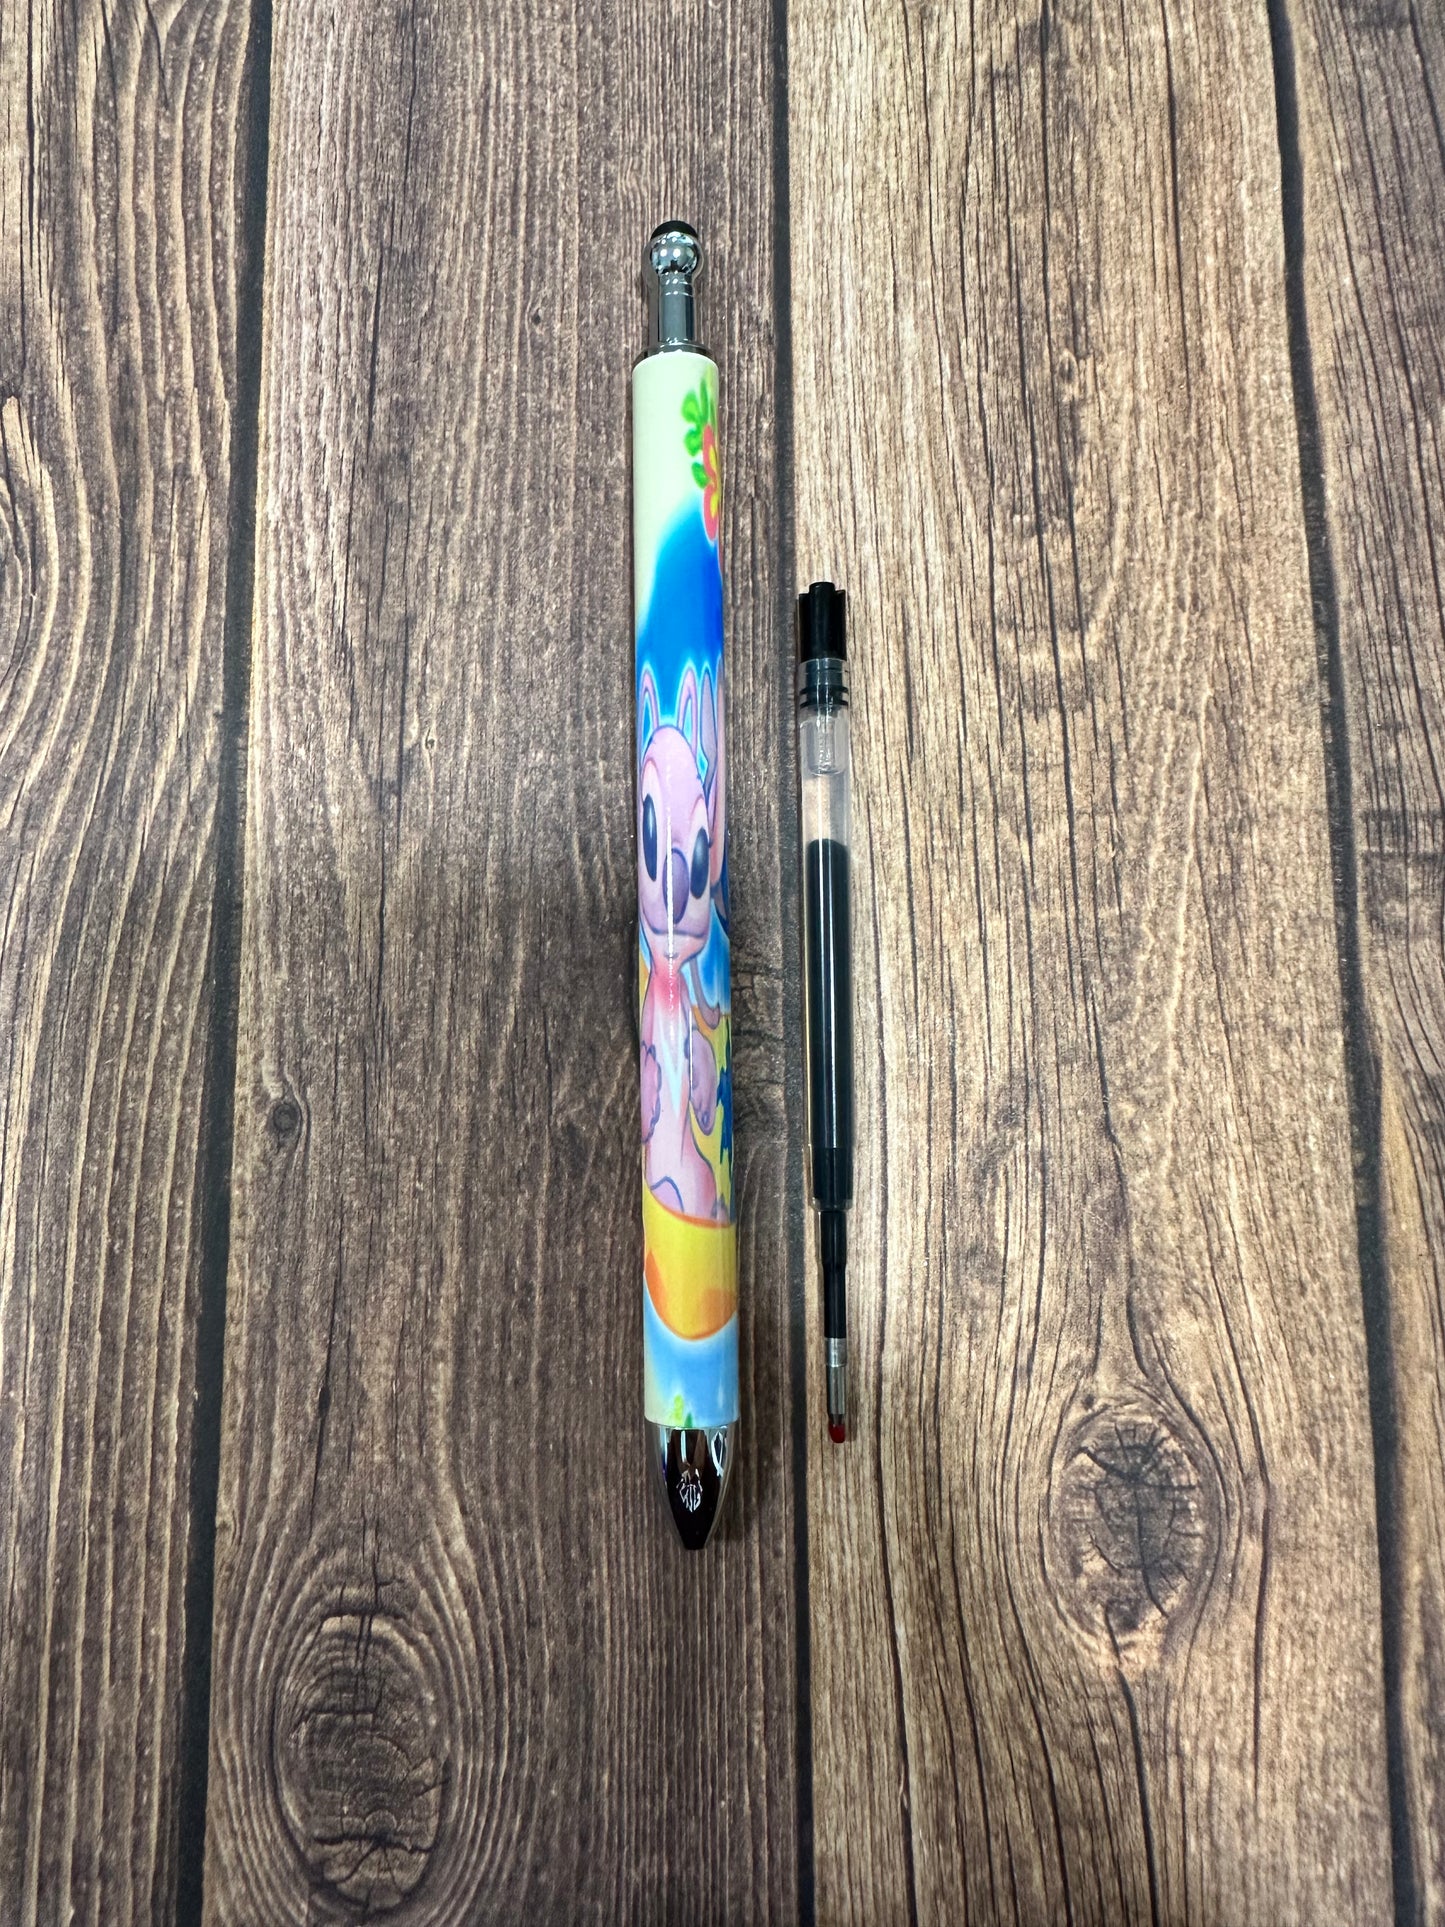 Flower stitch and girlfriend sublimation pen